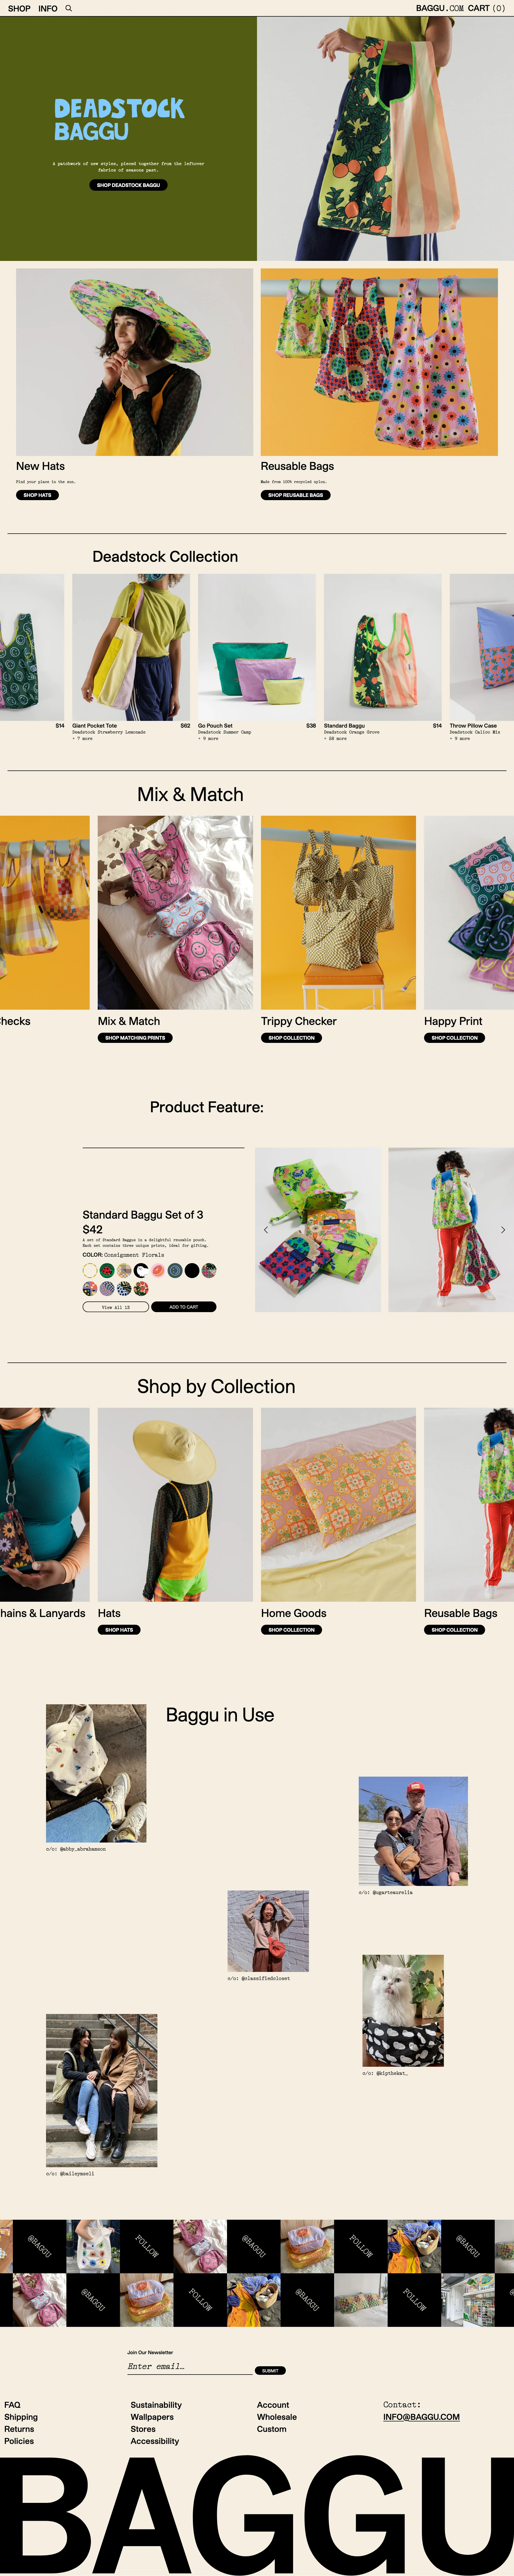 BAGGU Landing Page Example: BAGGU makes simple, intentional things for everyday use.